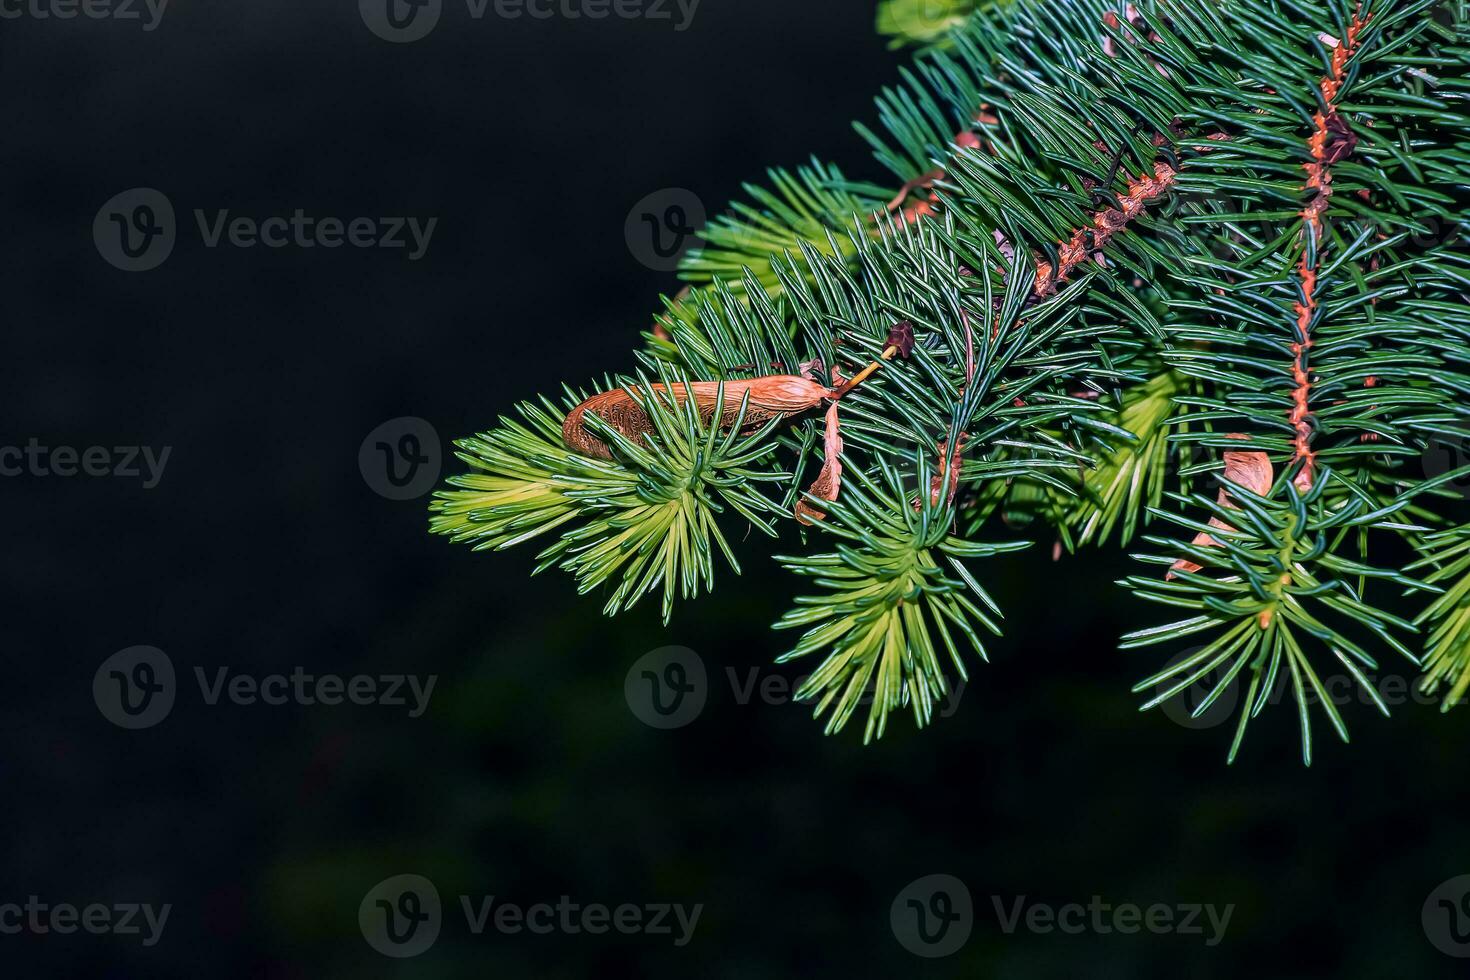 Blue spruce branches with needles on a dark background. Blue spruce with the Latin name Picea pungens. photo